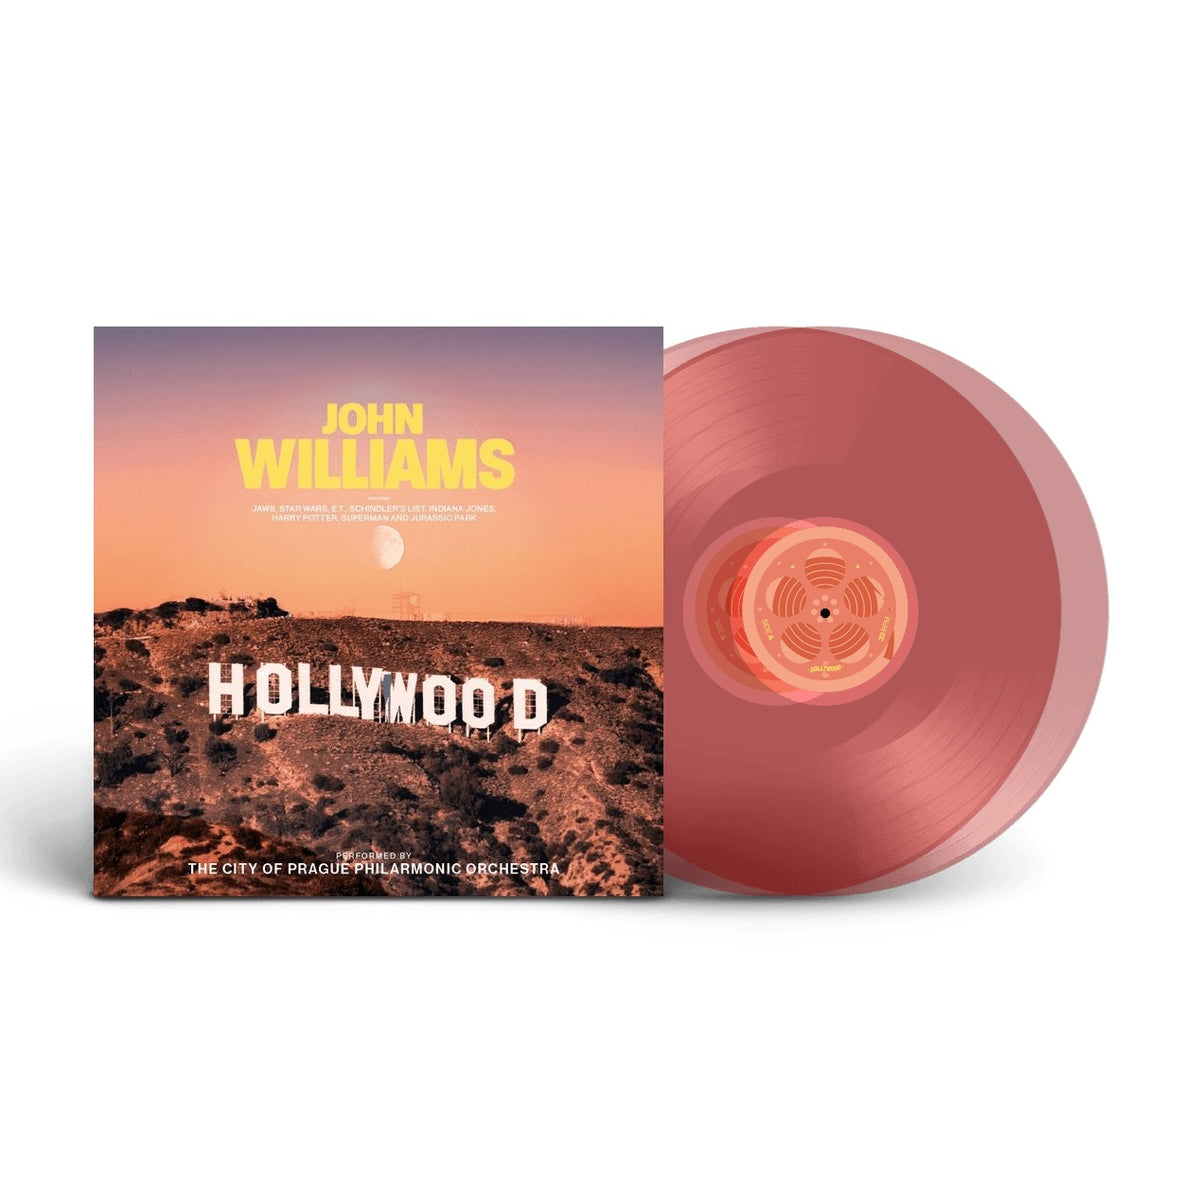 John Williams Hollywood Story (Soundtrack) Exclusive Pink Color